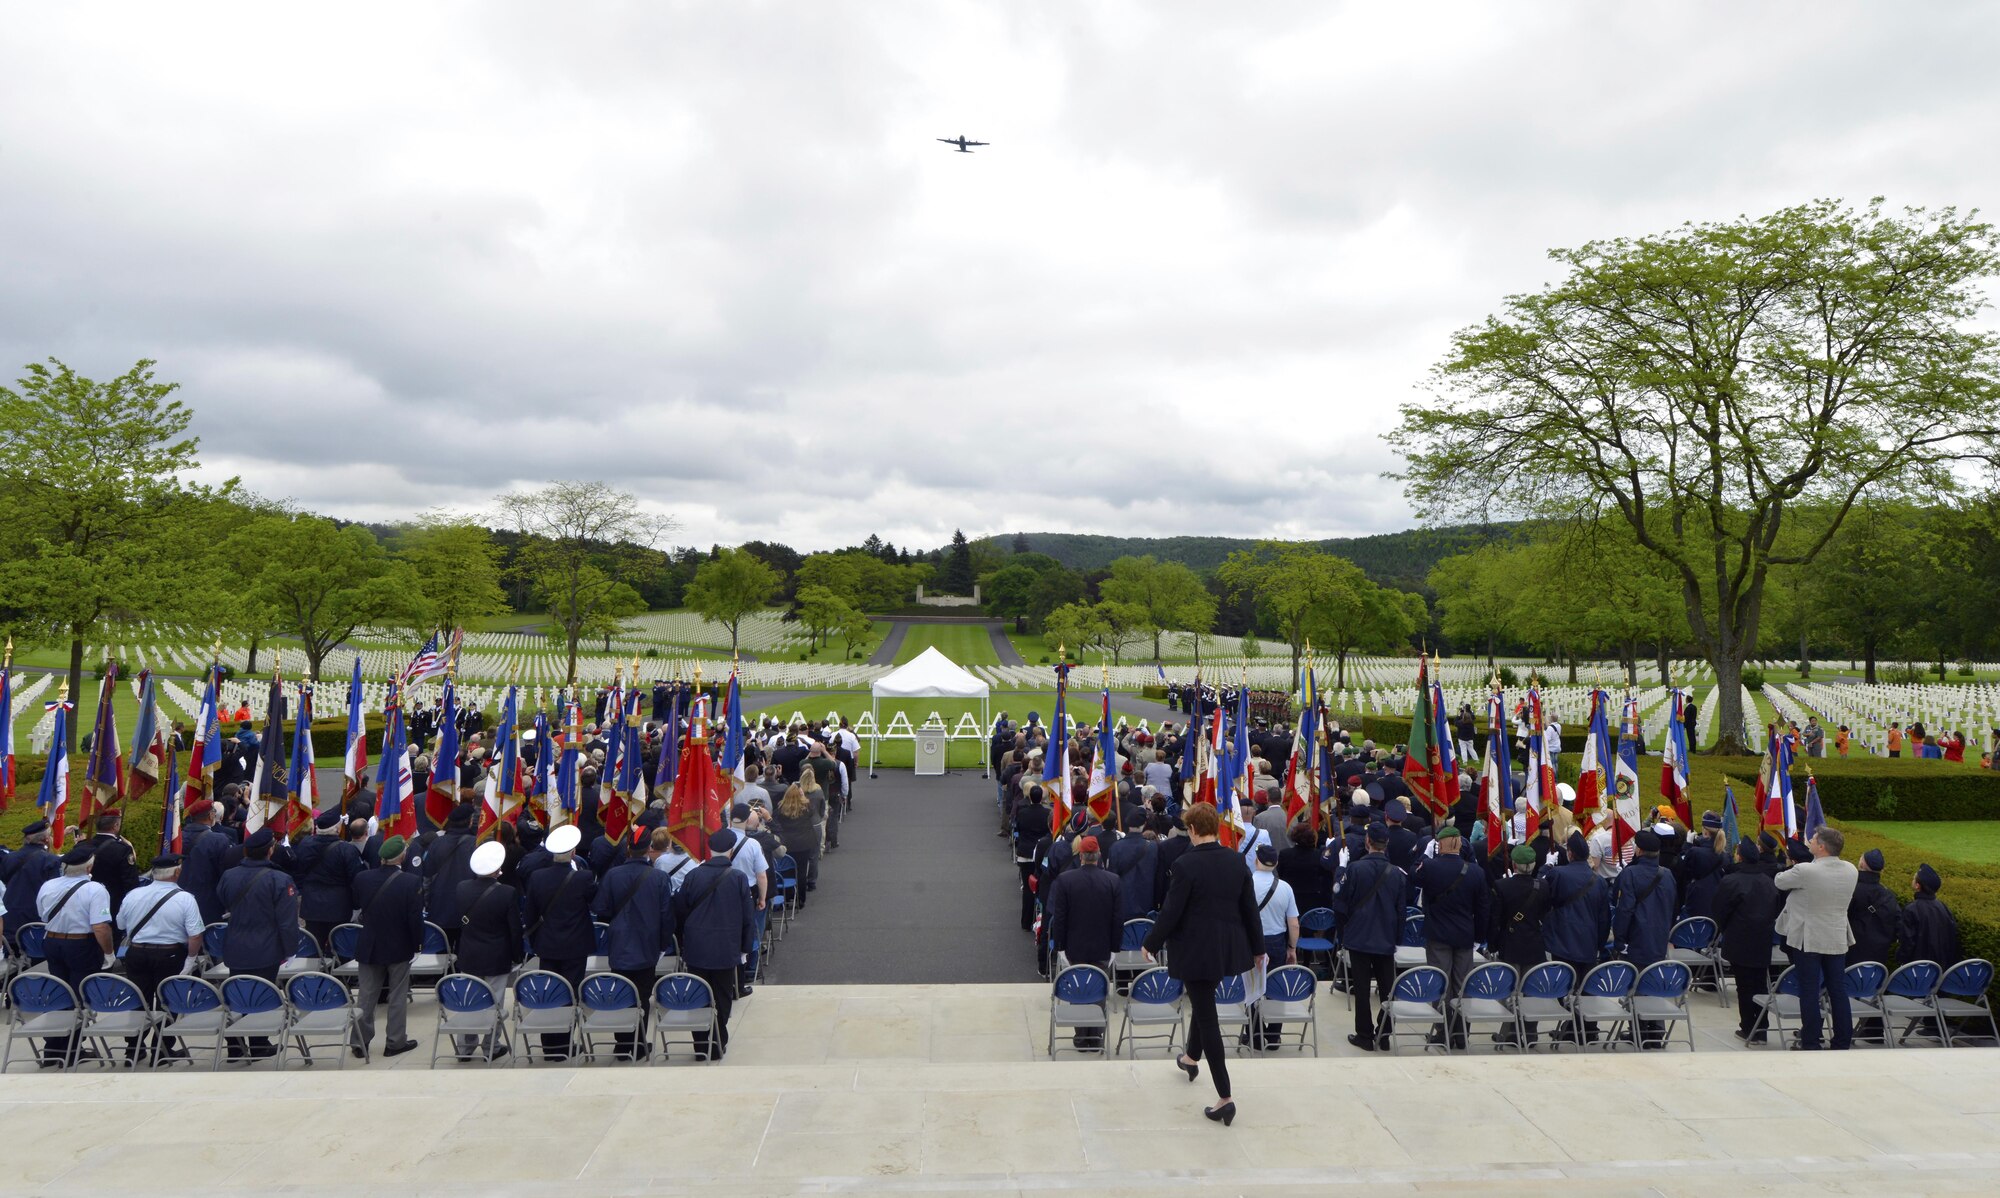 A 37th Airlift Squadron C-130J Super Hercules flies over a Memorial Day ceremony May 29, 2016, at Lorraine American Cemetery and Memorial, in St. Avold, France. The flyover renders honors to those buried in the cemetery. (U.S. Air Force photo/Staff Sgt. Sharida Jackson)